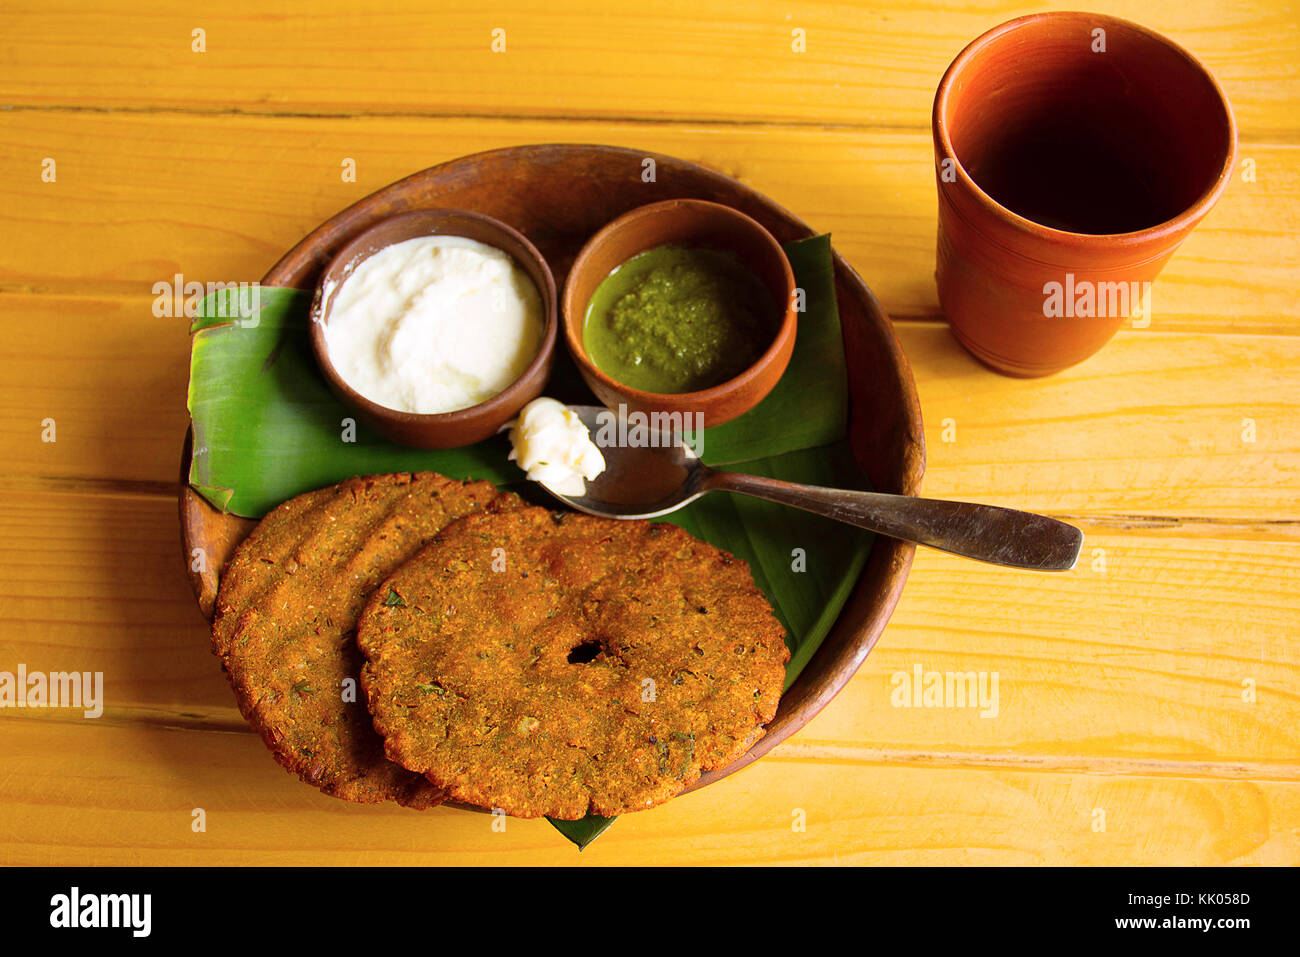 Top view of thalipith popular Maharashtrian savory pancakes with curd and pudina Chutney served in clay utensils Stock Photo